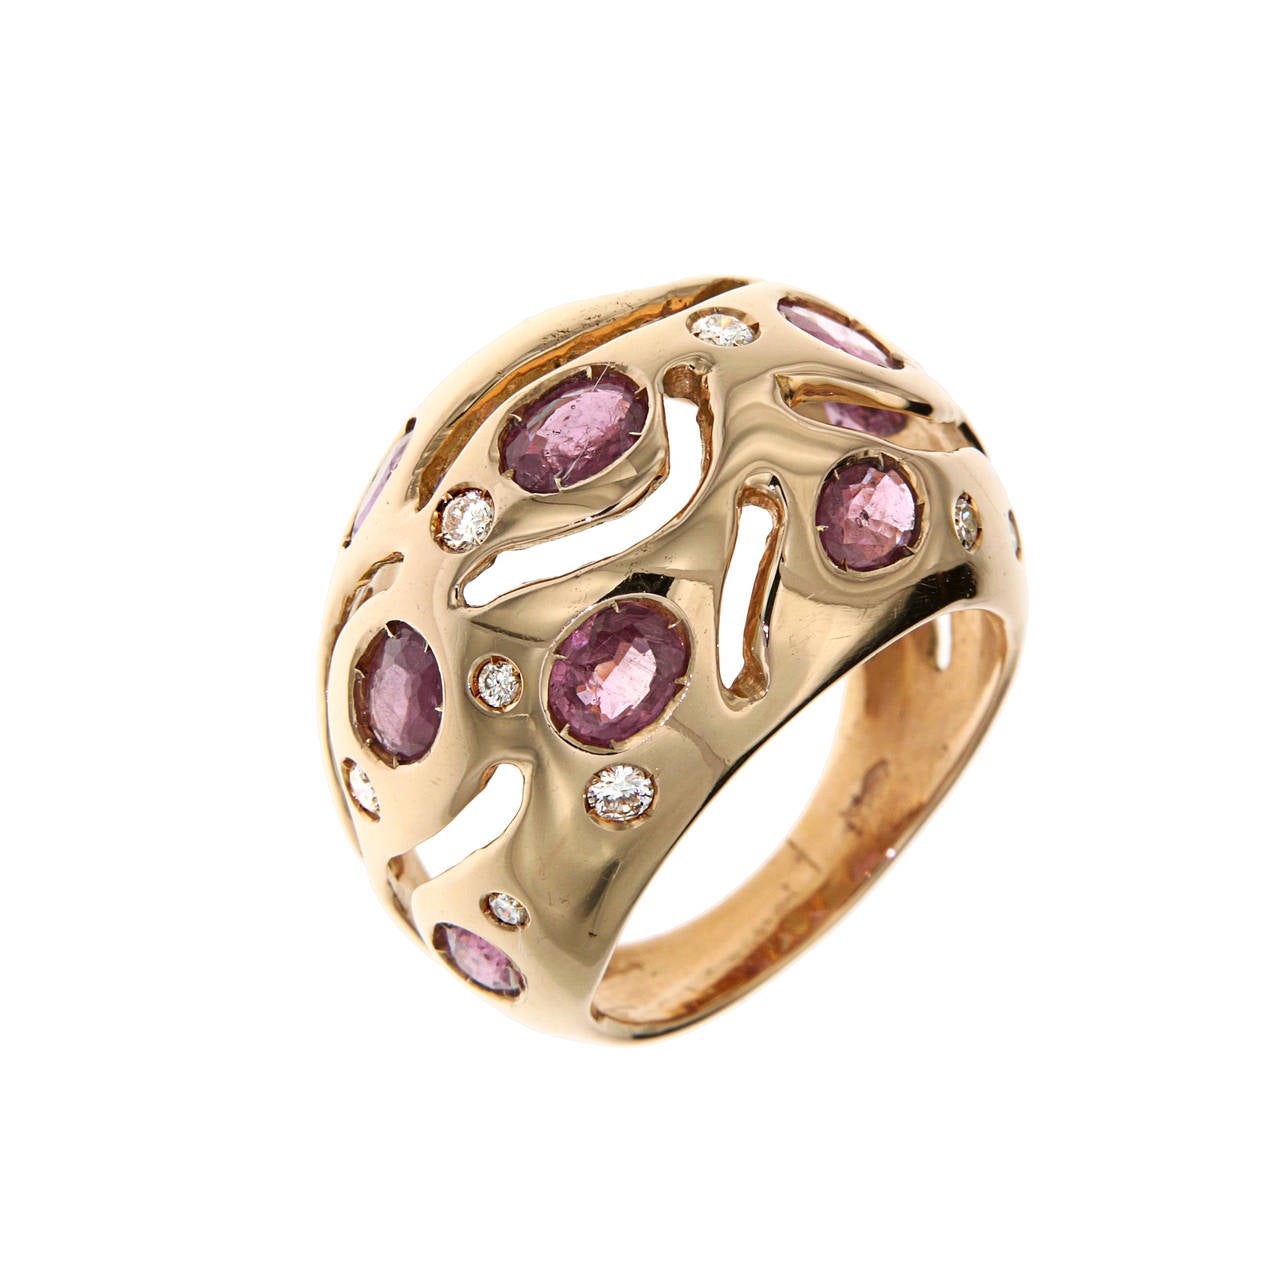 Red Rubies Diamonds 18 Karat Rose Gold Cocktail Ring Handcrafted In Italy For Sale